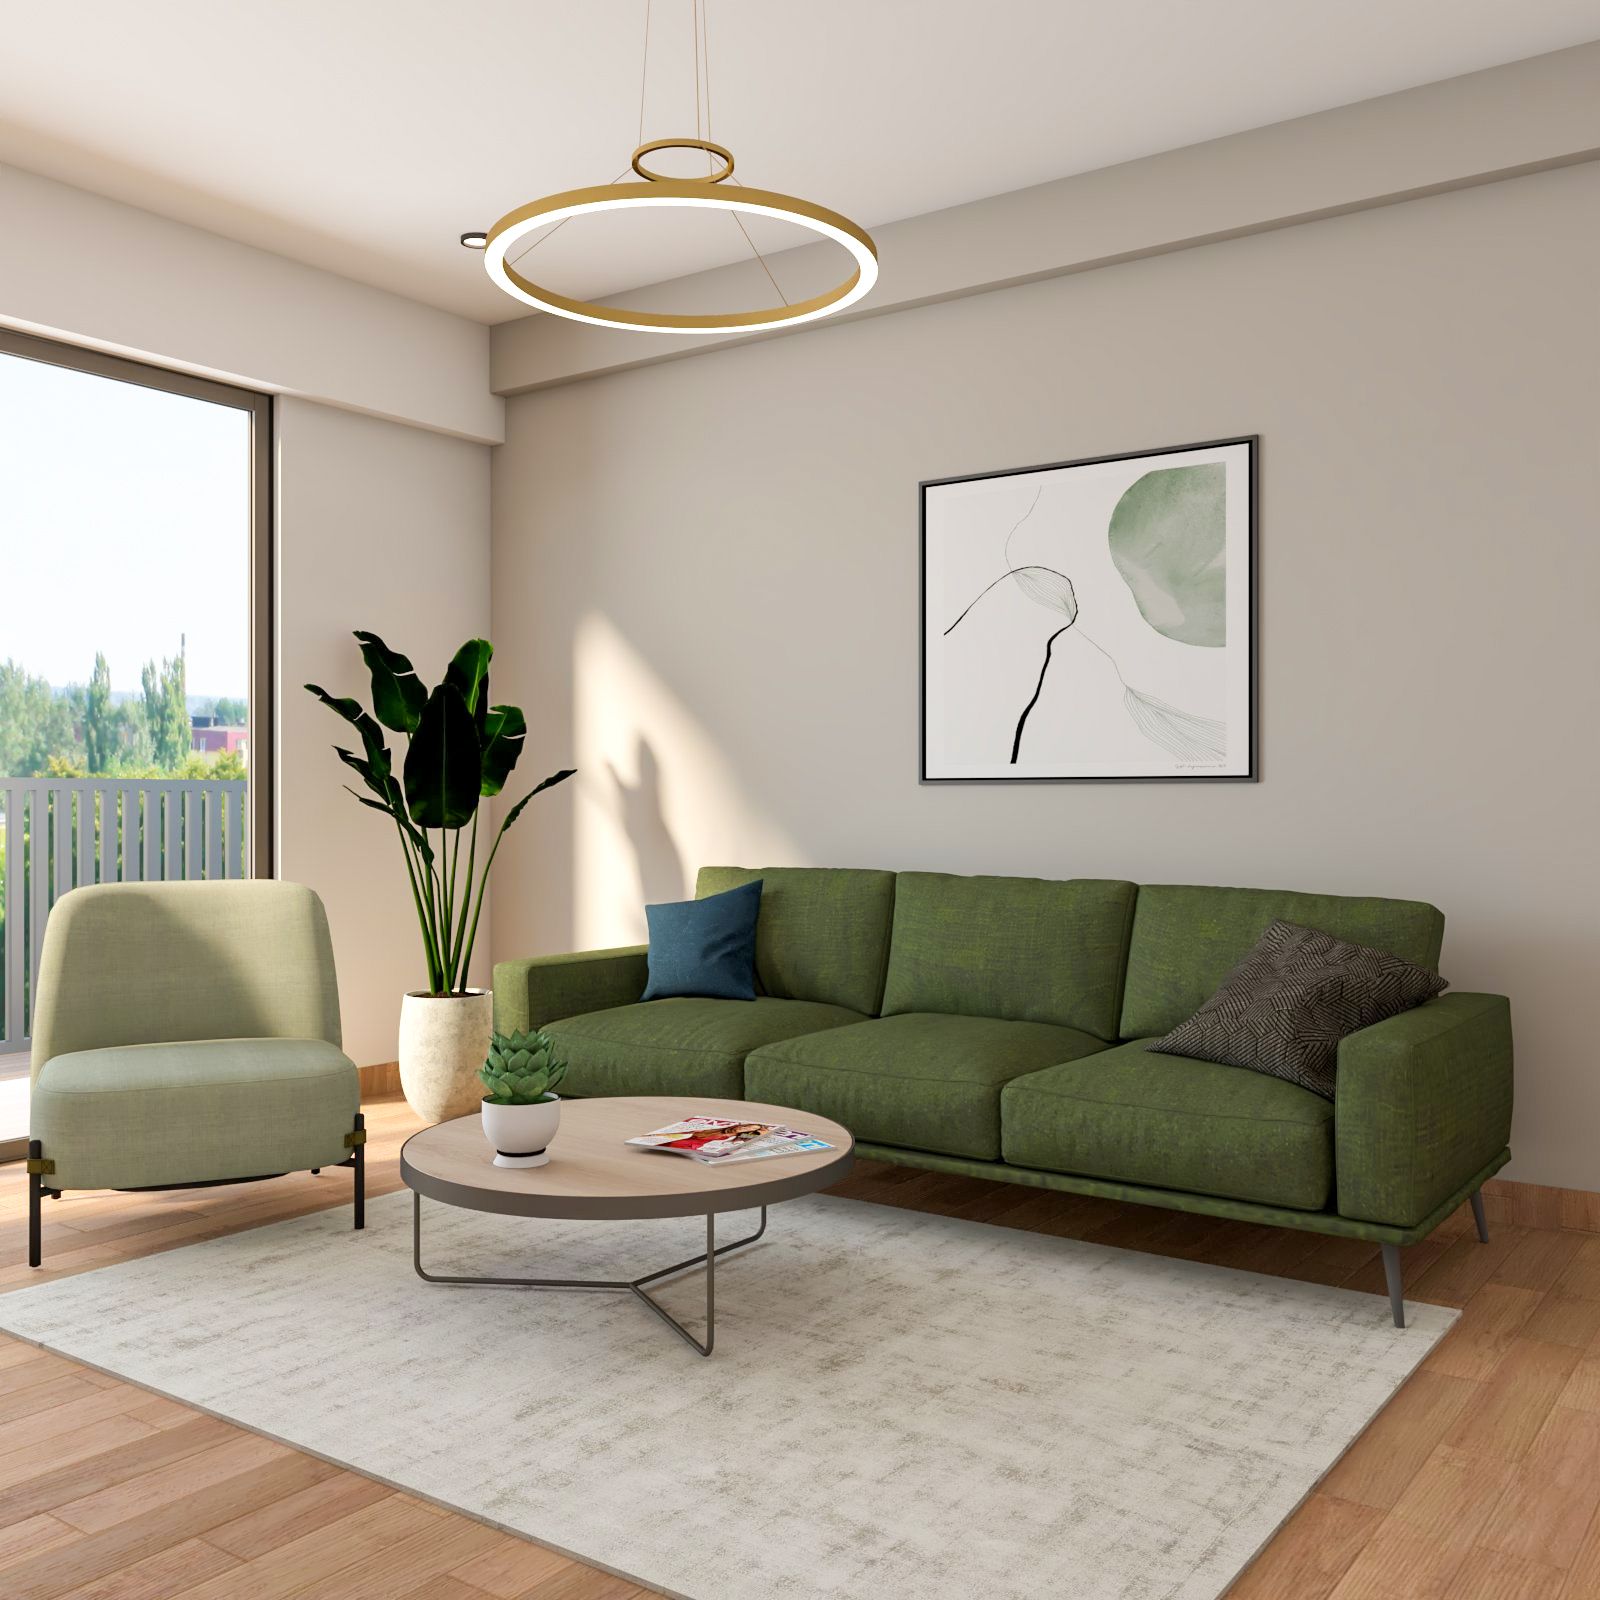 Modern Living Room Design With 3-Seater Green Sofa And Mint Green Accent Chair